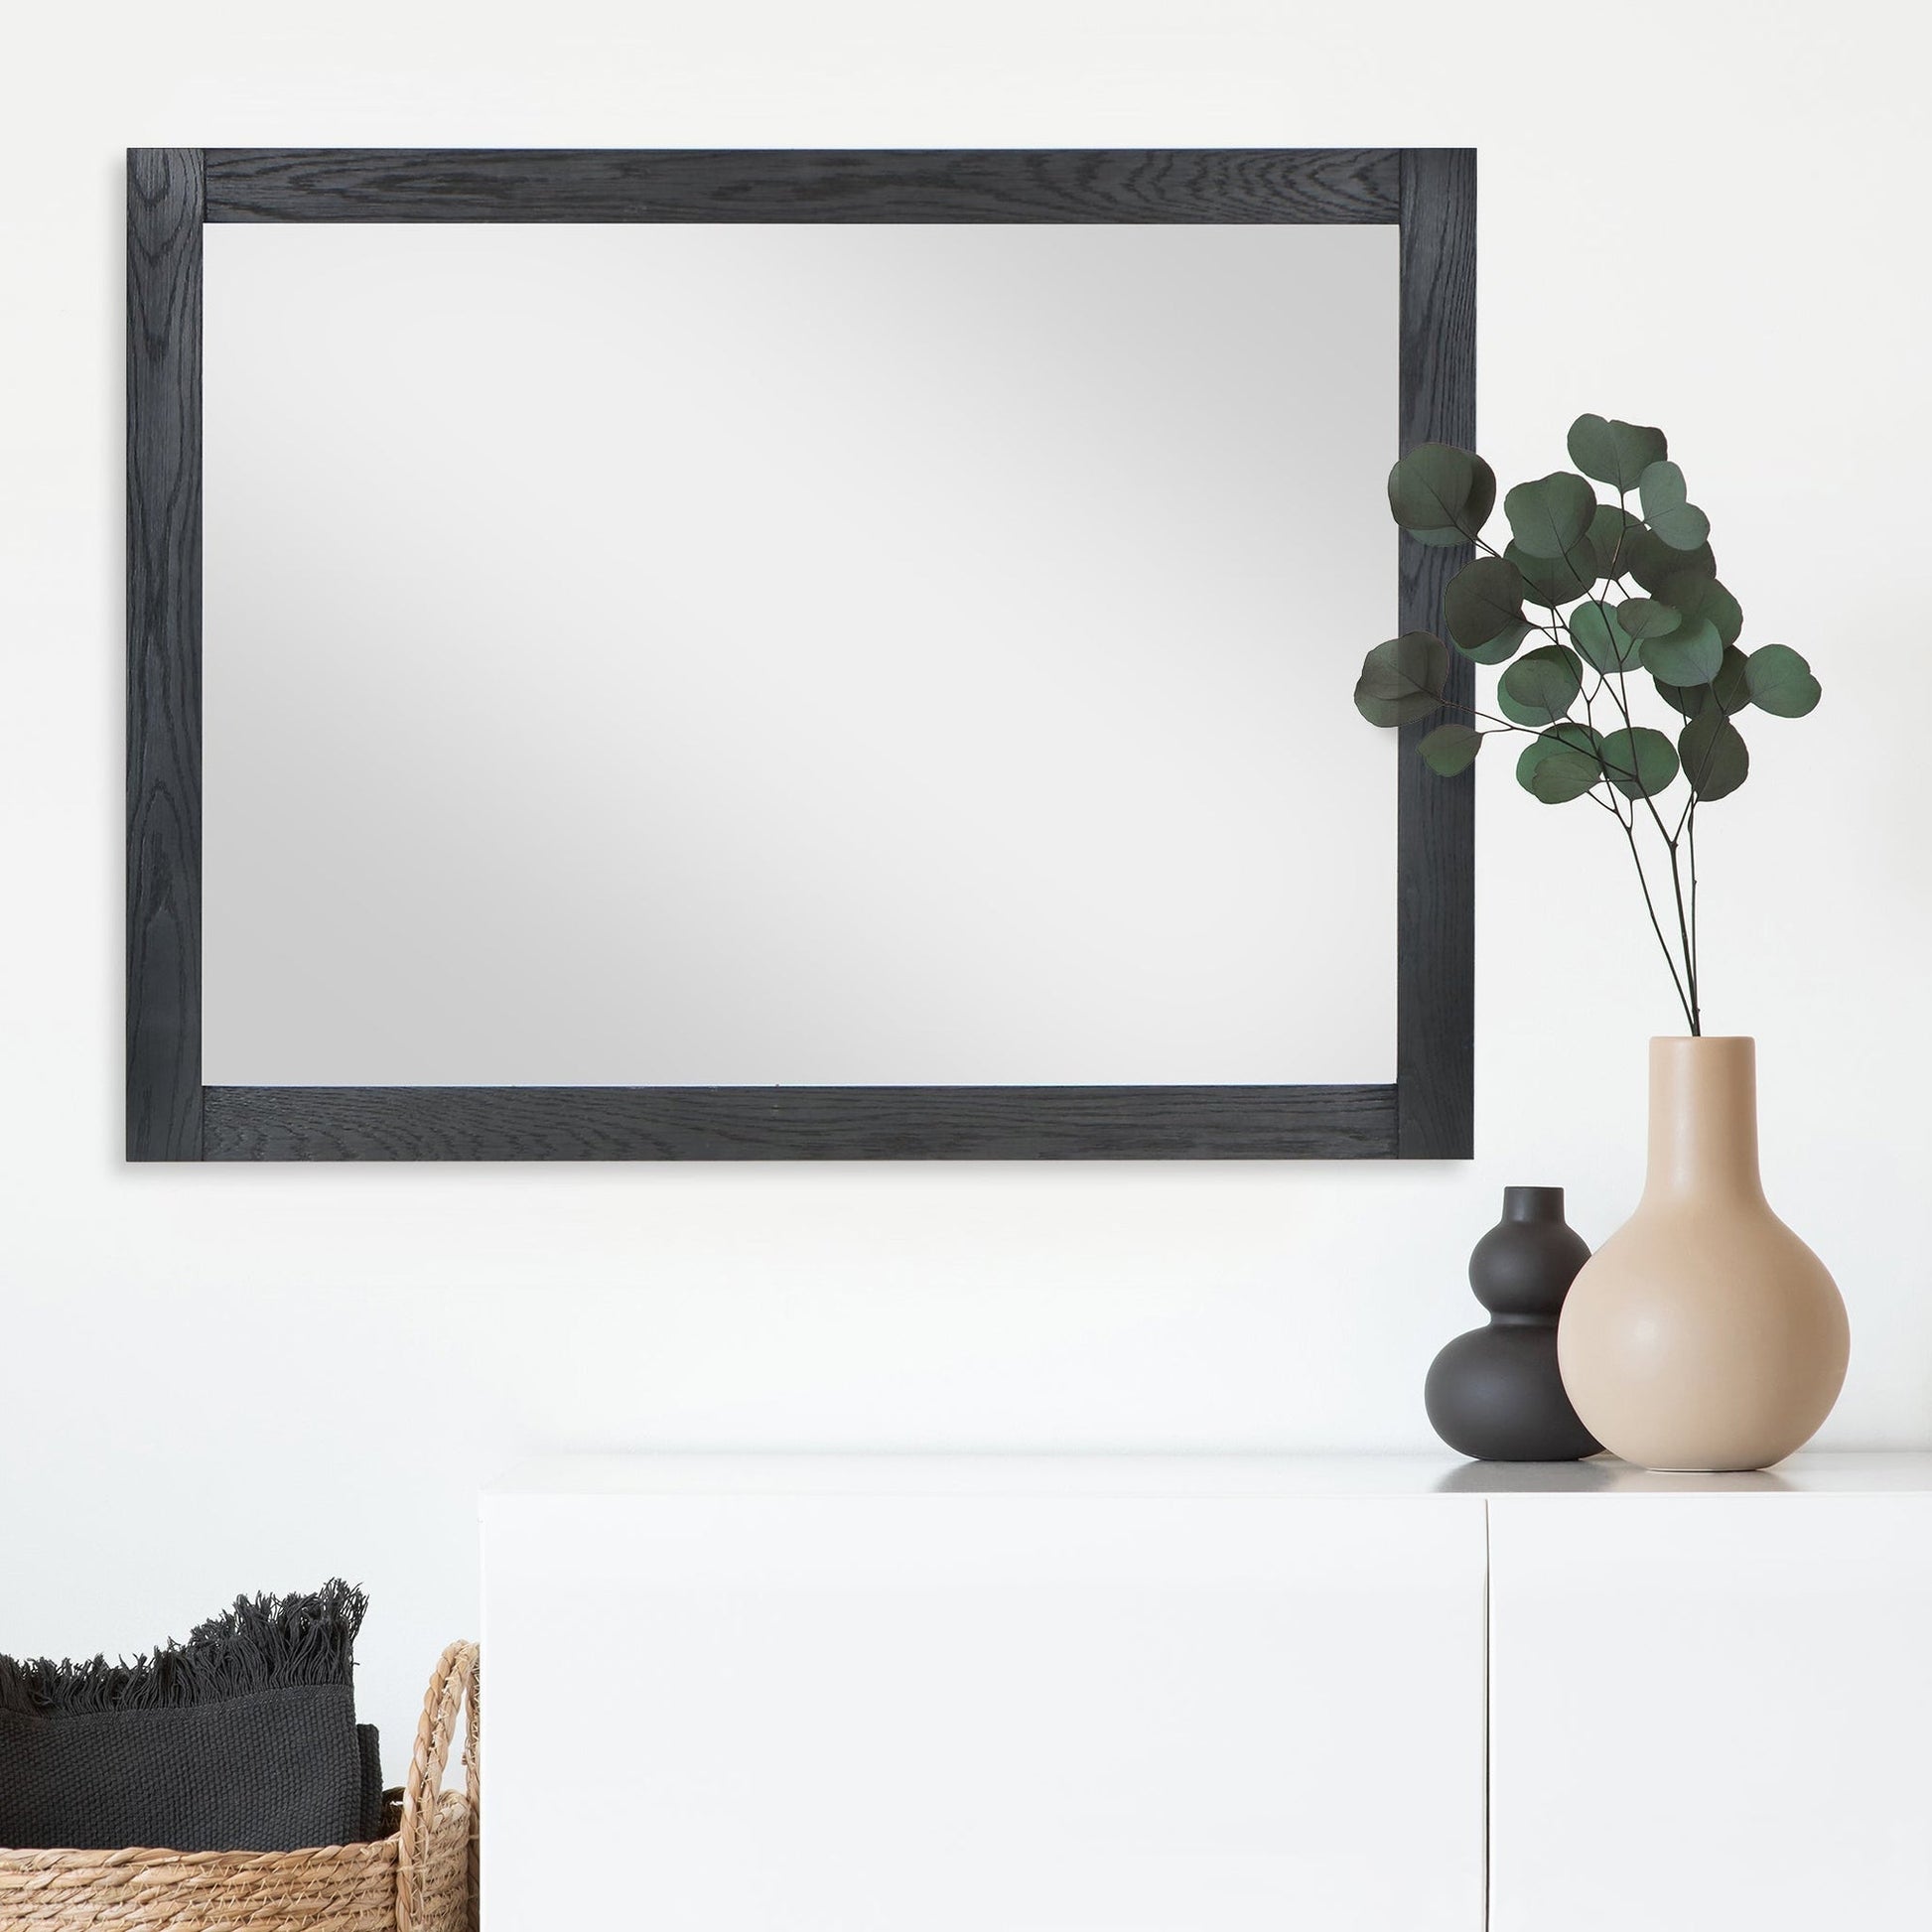 Altair Ivy 48" x 36" Rectangle Brown Oak Wood Framed Wall-Mounted Mirror